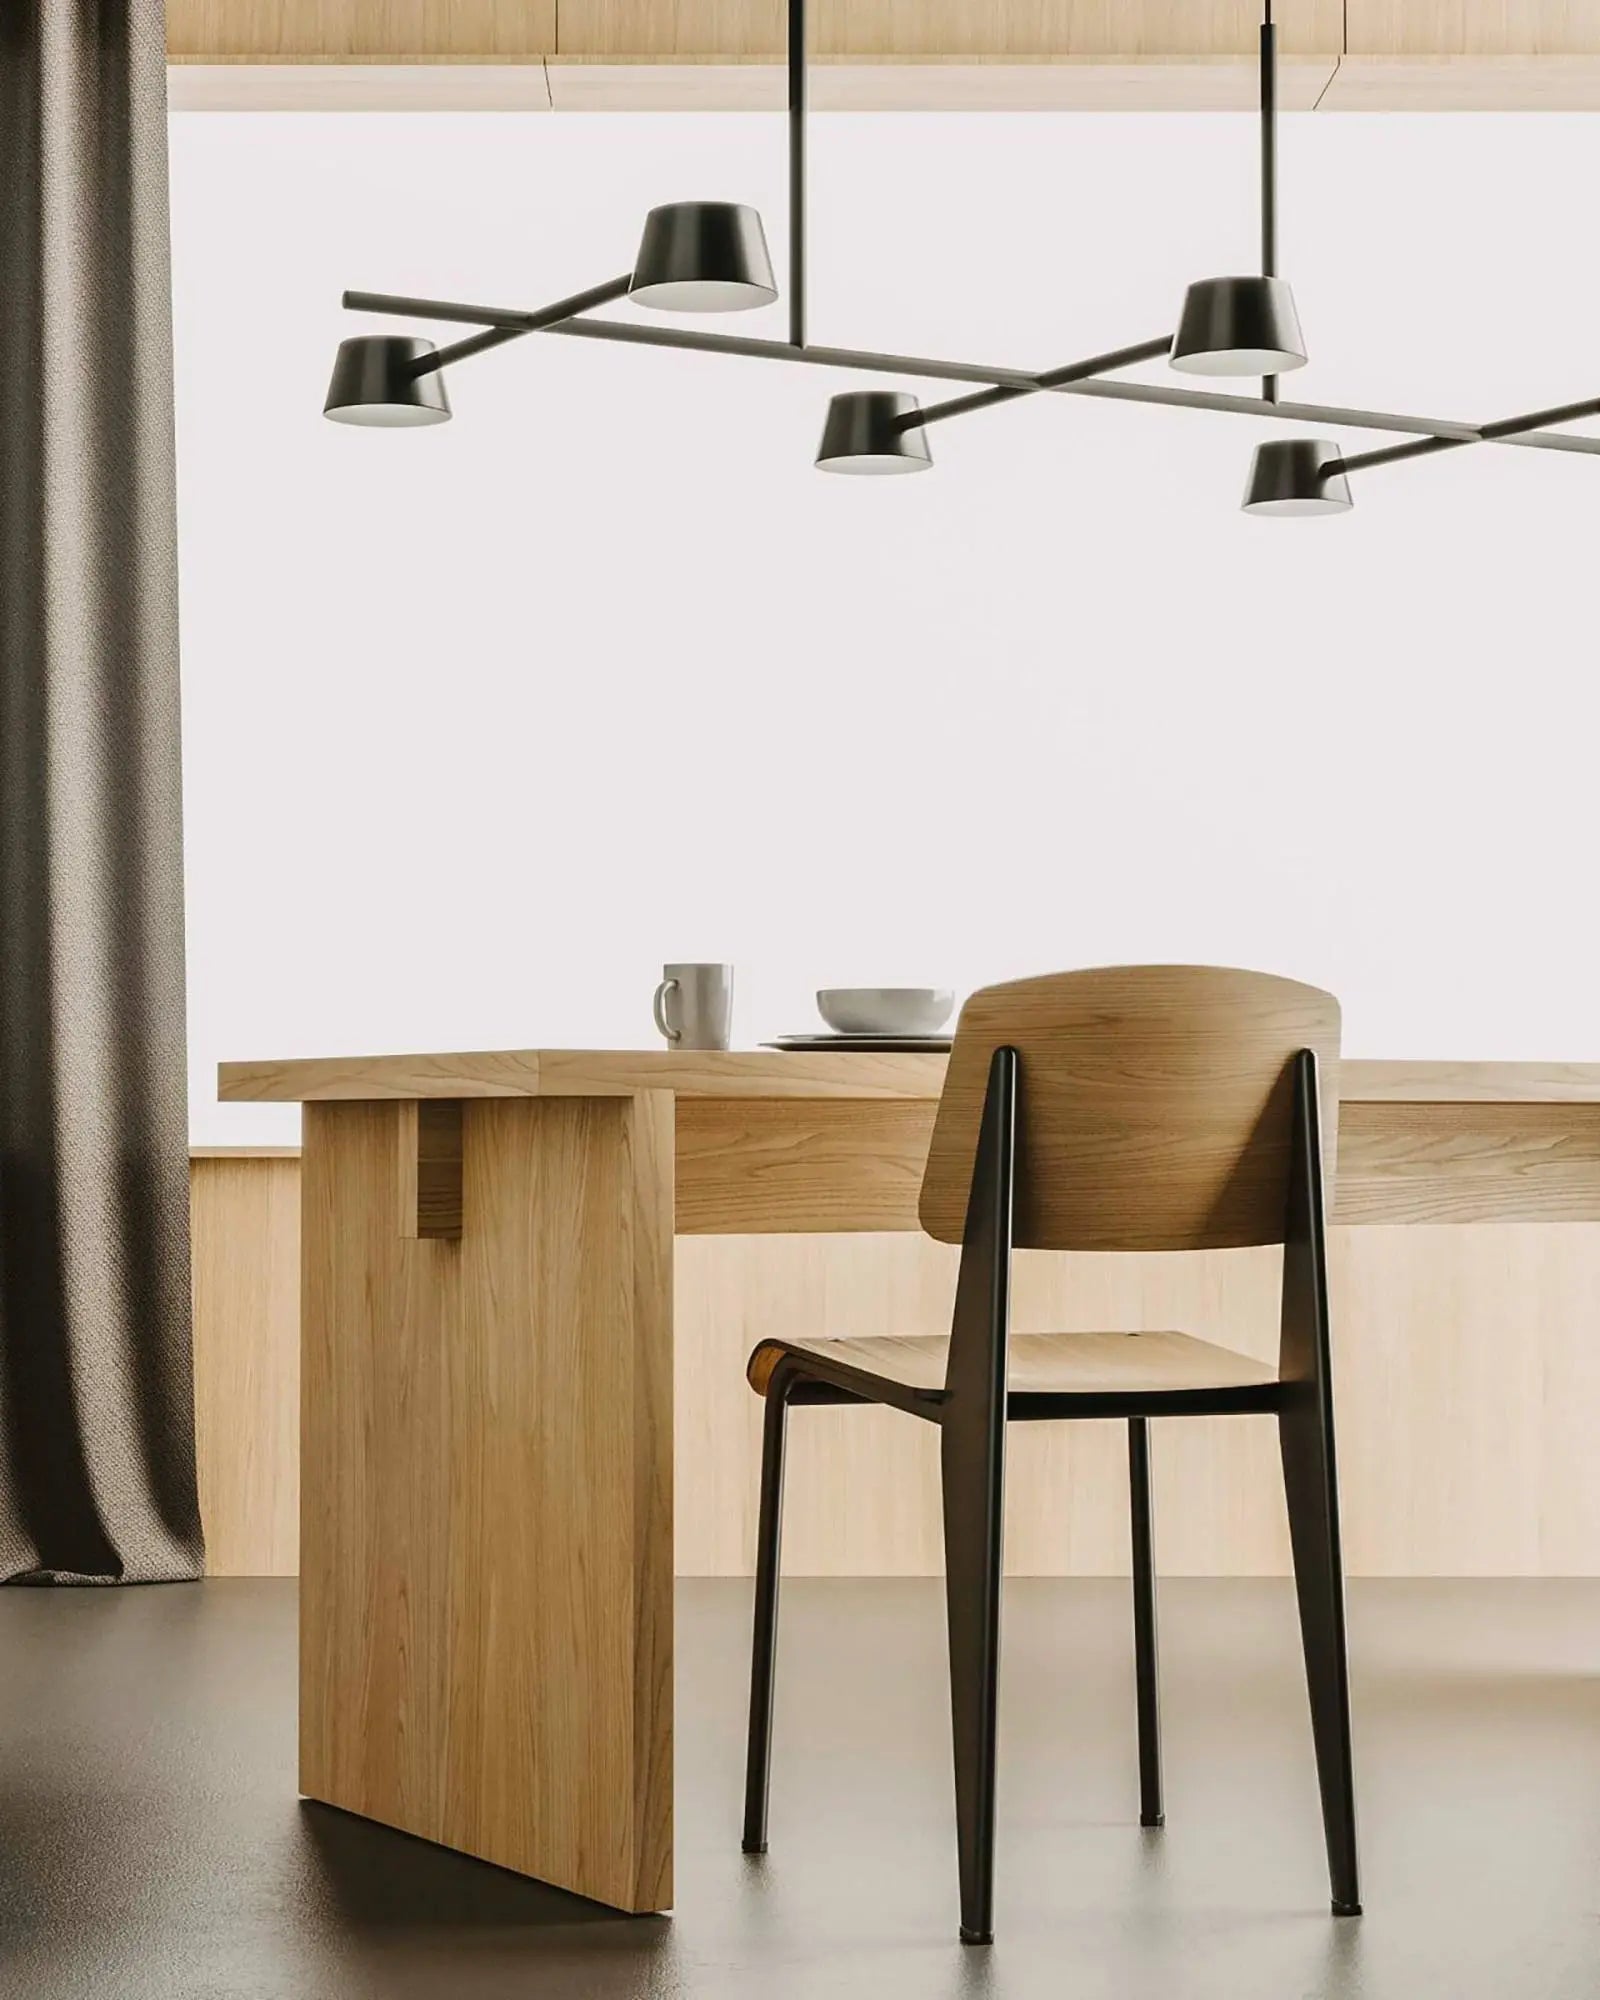 Nera 6 Lights contemporary linear pendant light above a dining table